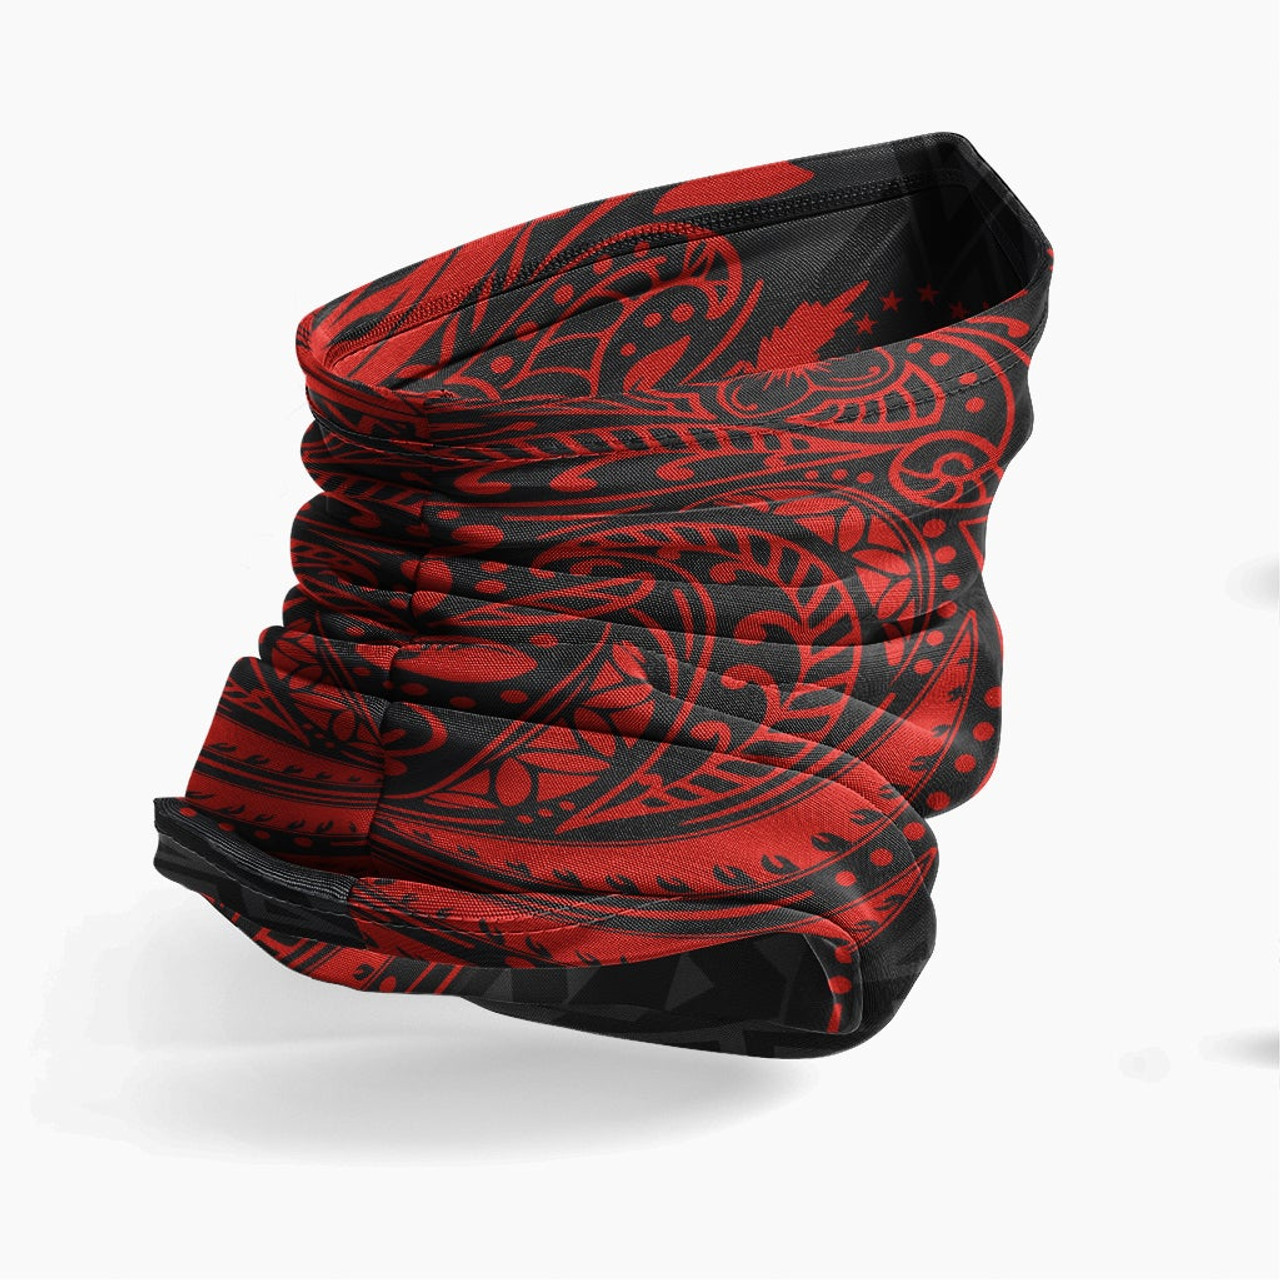 Pohnpei Neck Gaiter - Floral Tattoo Red 3